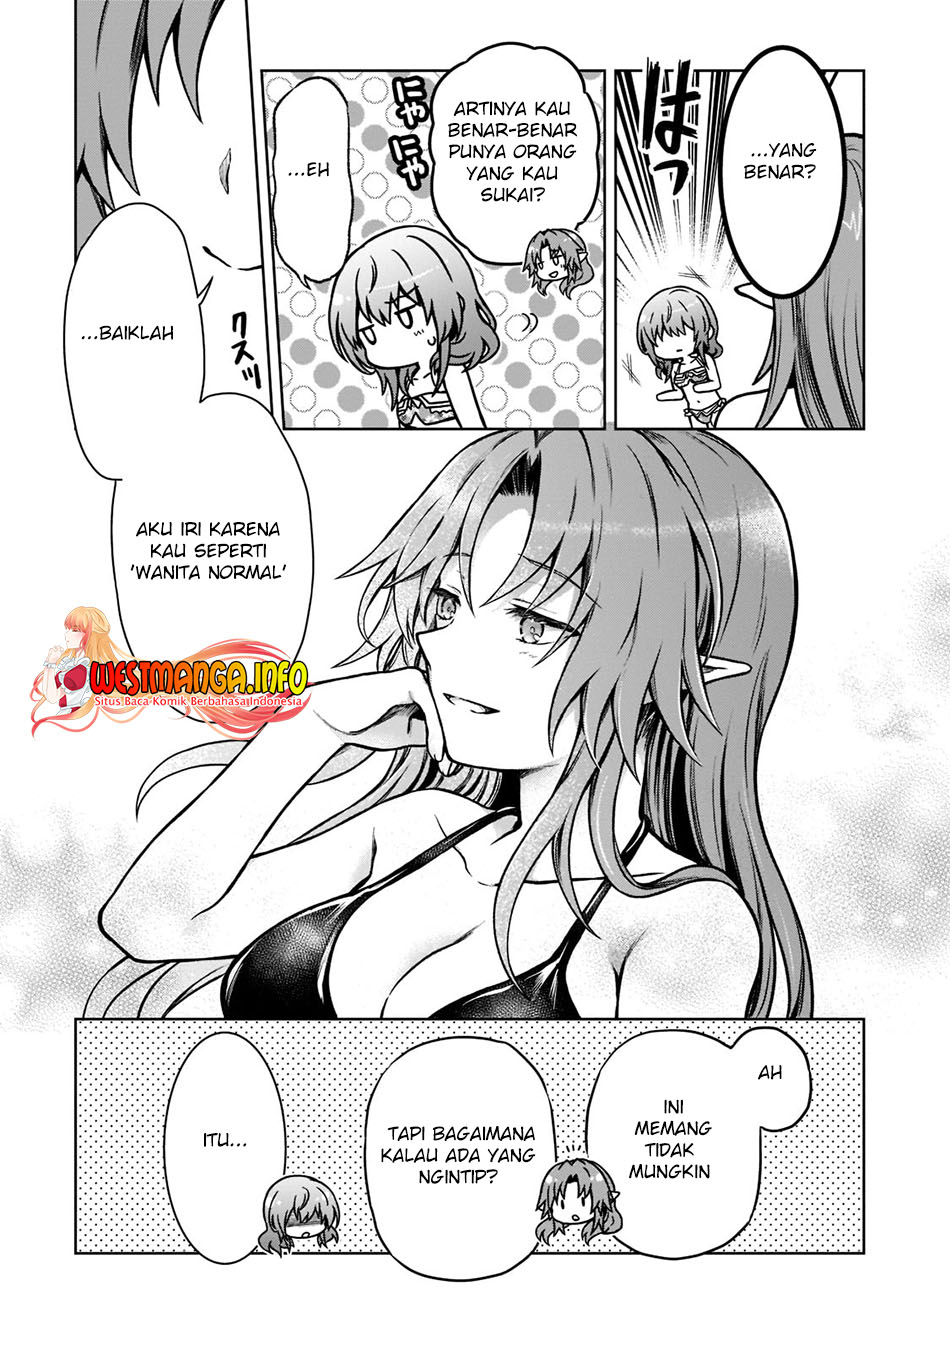 Dilarang COPAS - situs resmi www.mangacanblog.com - Komik d rank adventurer invited by a brave party and the stalking princess 008 - chapter 8 9 Indonesia d rank adventurer invited by a brave party and the stalking princess 008 - chapter 8 Terbaru 11|Baca Manga Komik Indonesia|Mangacan